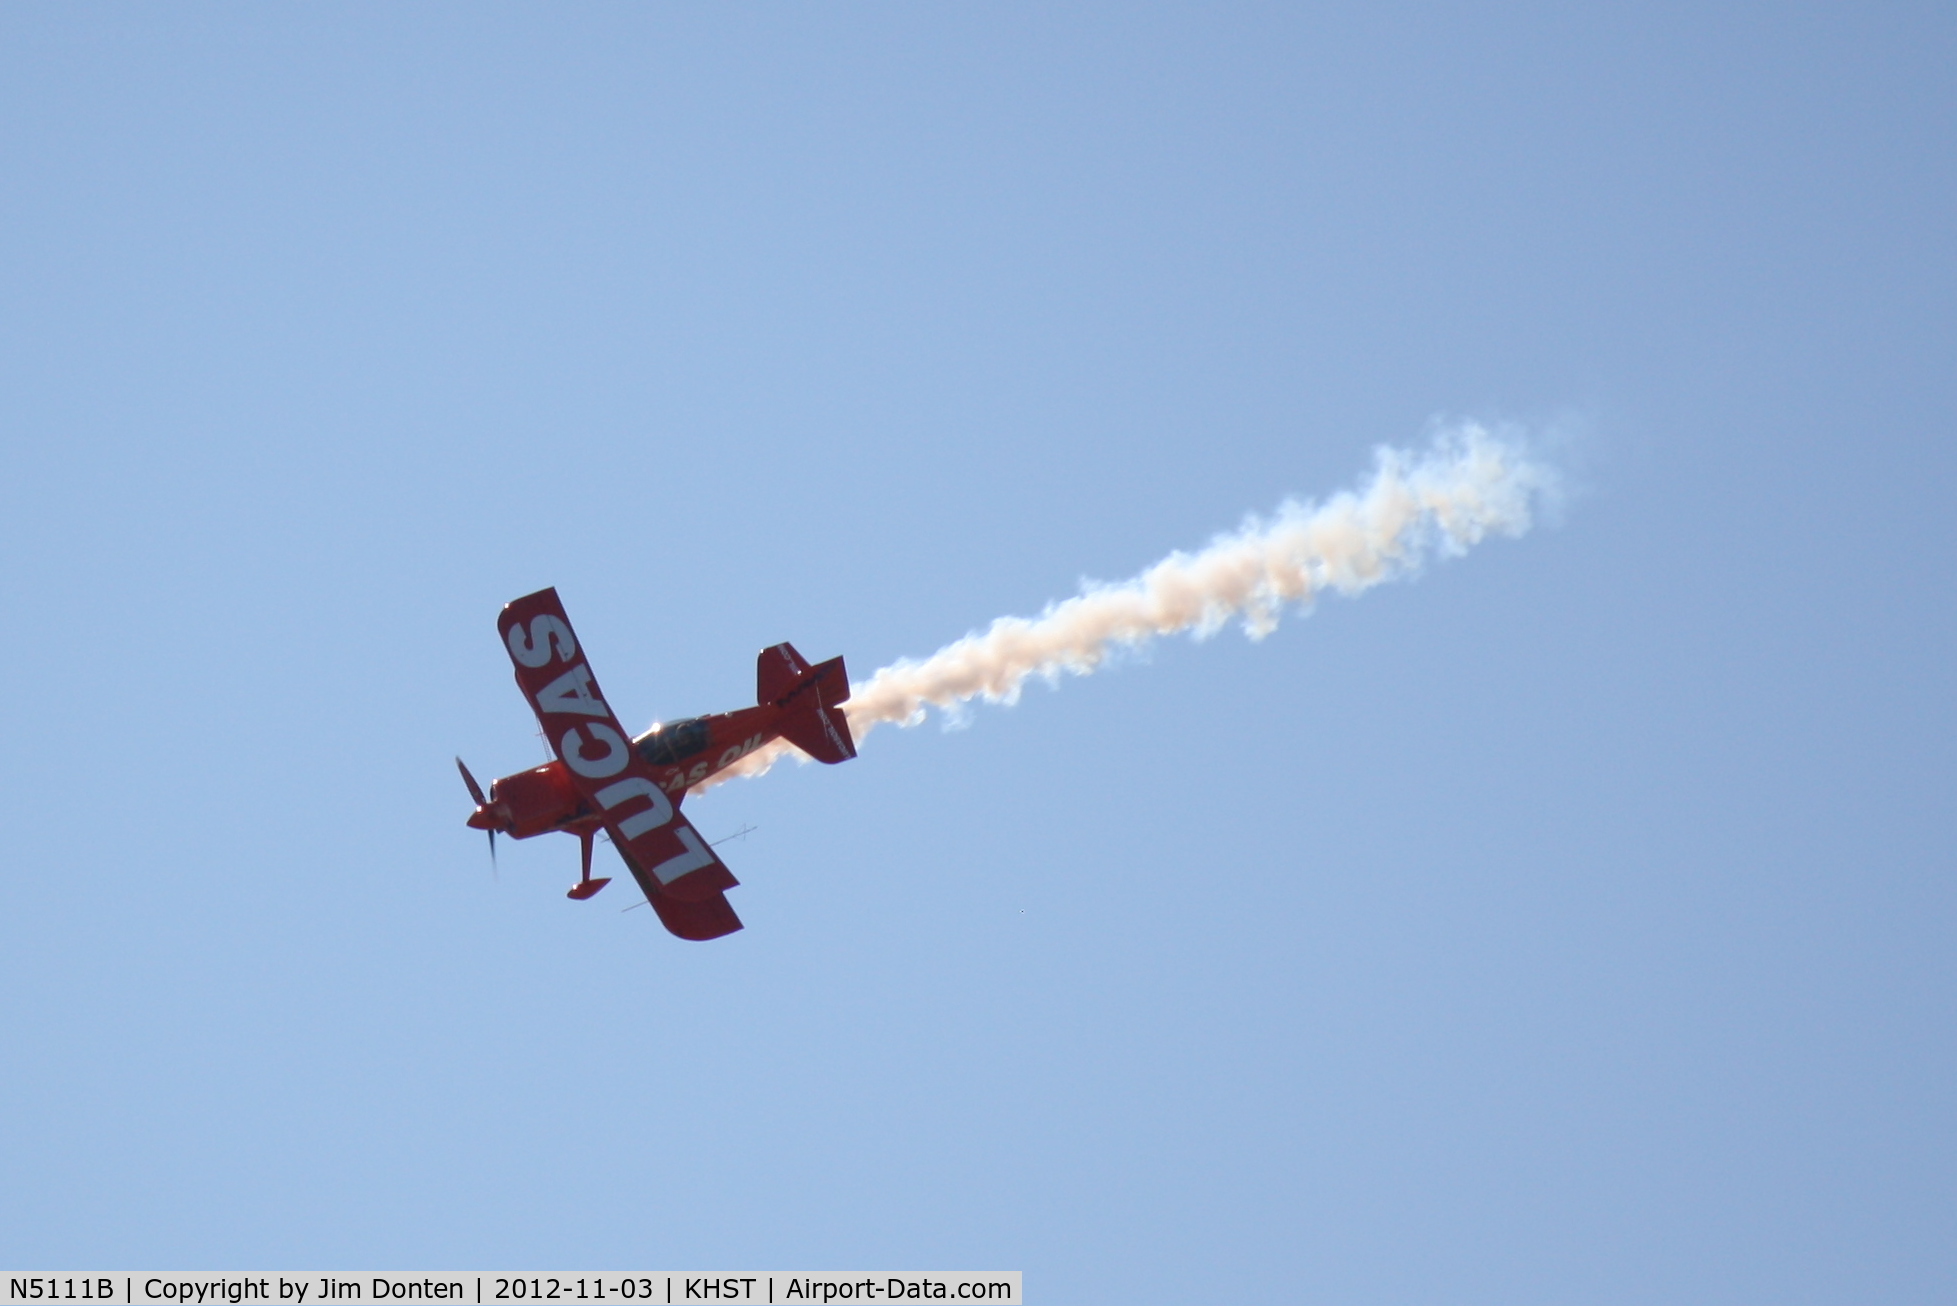 N5111B, 1998 Pitts S-1-11B Super Stinker C/N 4003, Mike Wiskus performs in his Pitts S-1 during Wings over Homestead